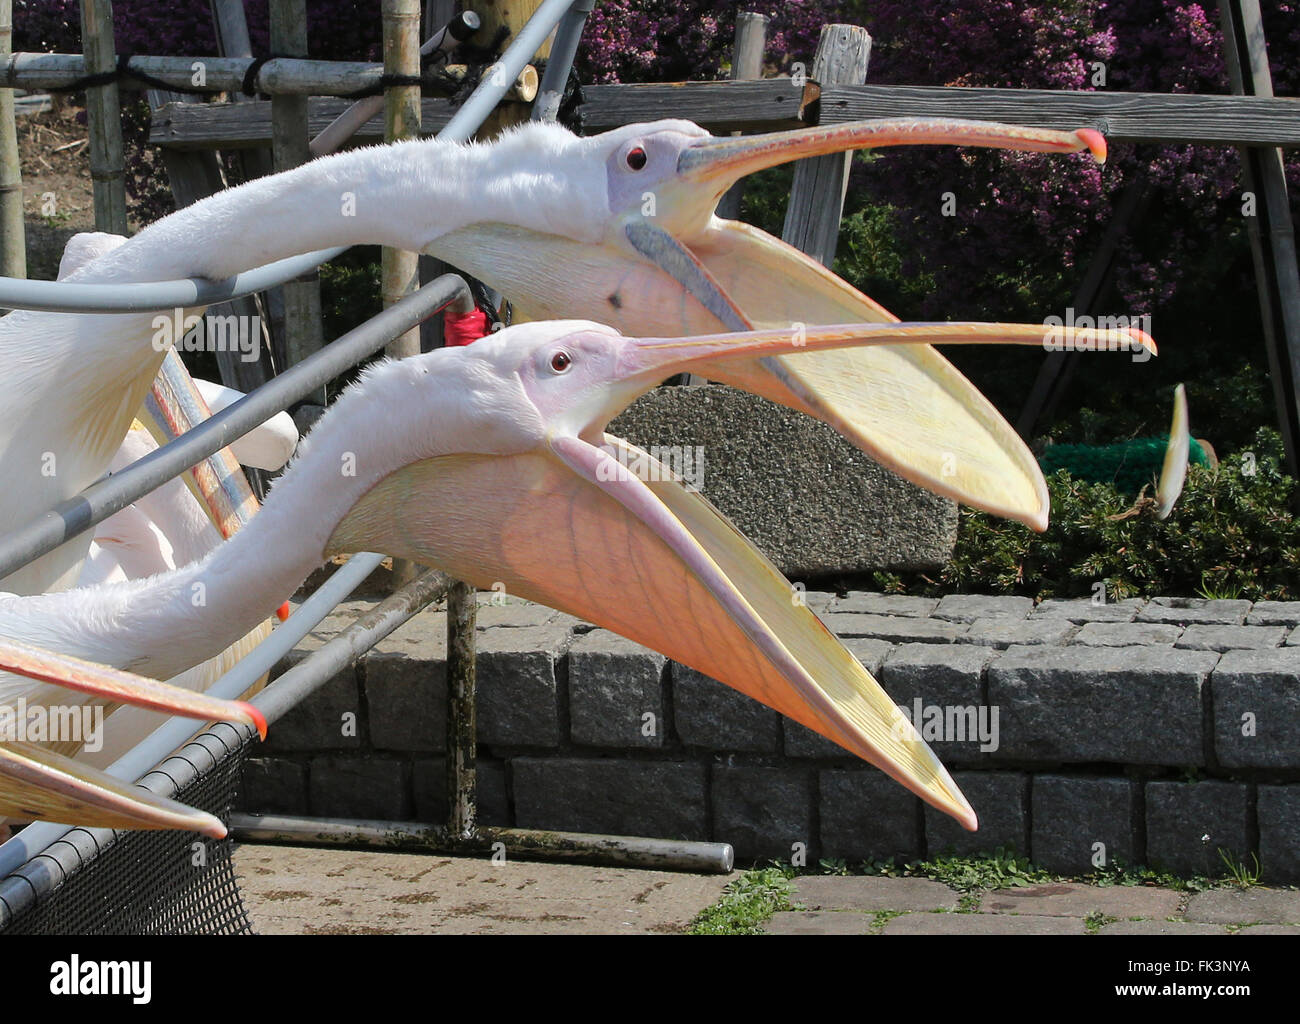 Tokyo, Japan. 5th Mar, 2016. Pelicans wait for a treat at the Hakkeijima Sea Paradise in Yokohama, Kanagawa prefecture on Saturday, March 5, 2016. The amusement park with aquarium introduced their new attraction "Rakuen no aquarium (aquarium of paradise)' where floral images appear on the walls and interior of the aquarium. © Yoshio Tsunoda/AFLO/Alamy Live News Stock Photo